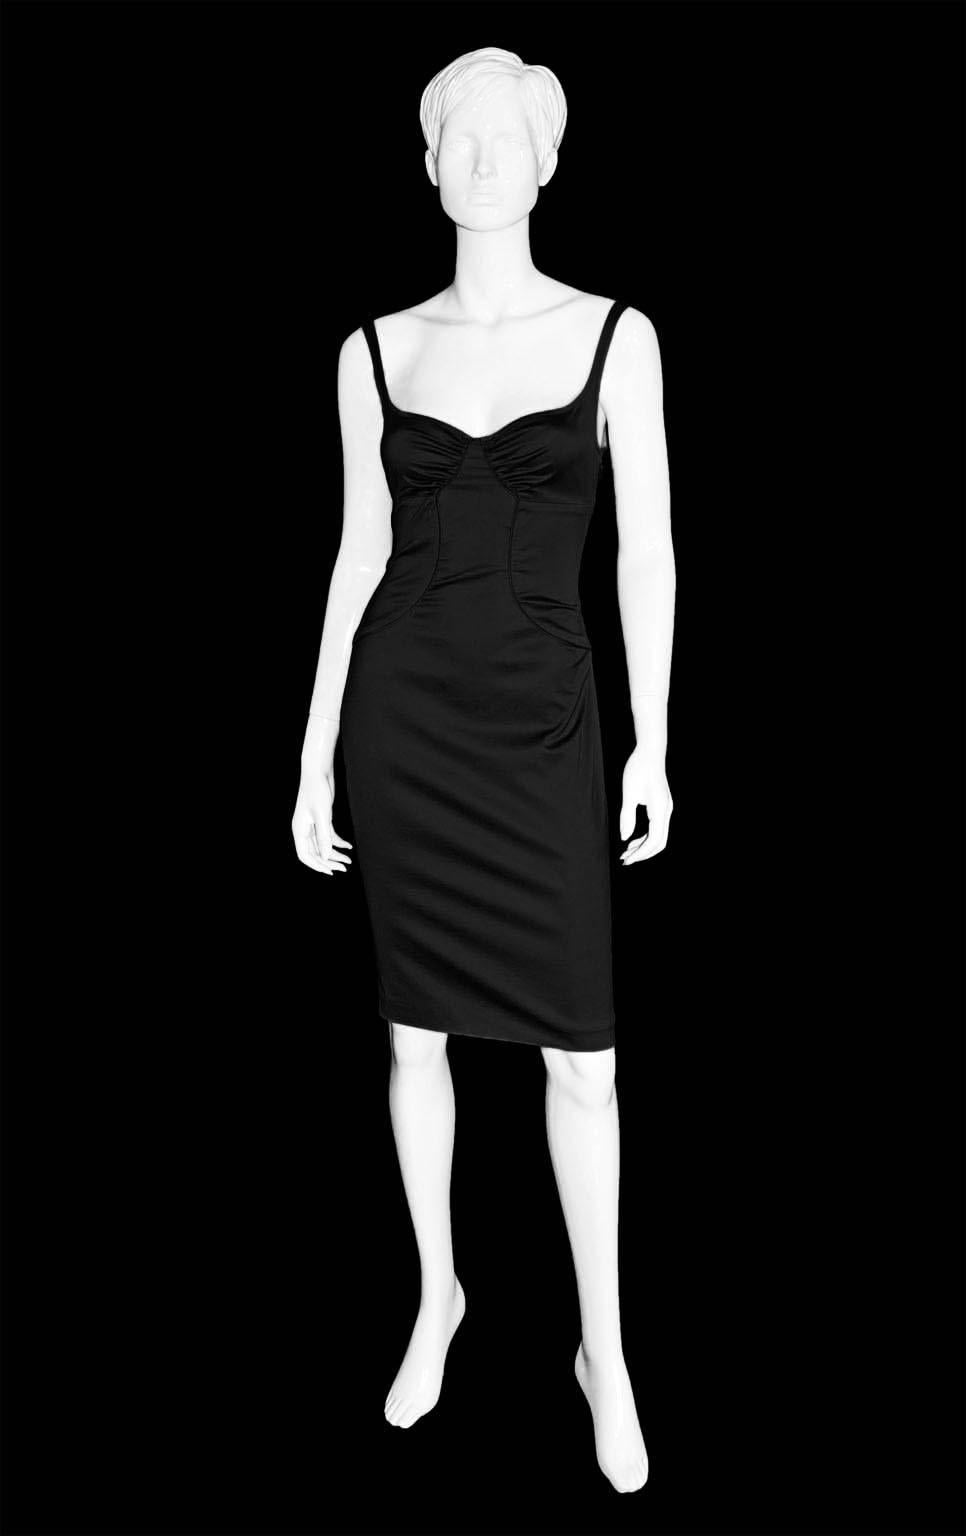 Rare & Iconic Tom Ford Gucci FW 2003 Black Corseted Bustle Dress!

Who could ever forget Tom Ford's fall/winter 2003 Collection for Gucci... with all of that corseted styling & heavenly detailing? Well this heavenly black bustle dress, surely one of